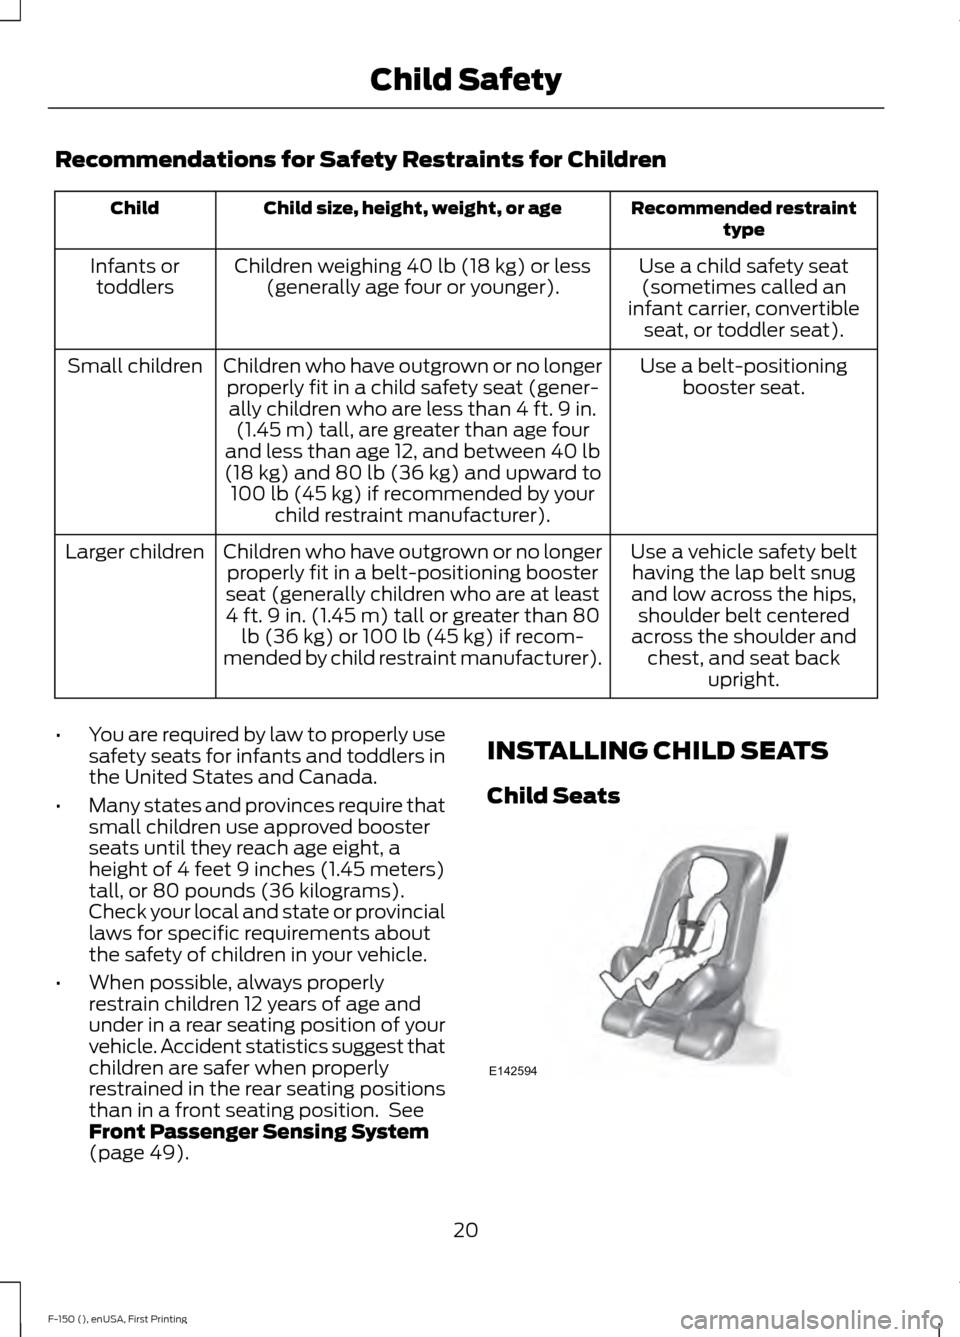 FORD F150 2015 13.G Owners Manual Recommendations for Safety Restraints for Children
Recommended restraint
type
Child size, height, weight, or age
Child
Use a child safety seat(sometimes called an
infant carrier, convertible seat, or 